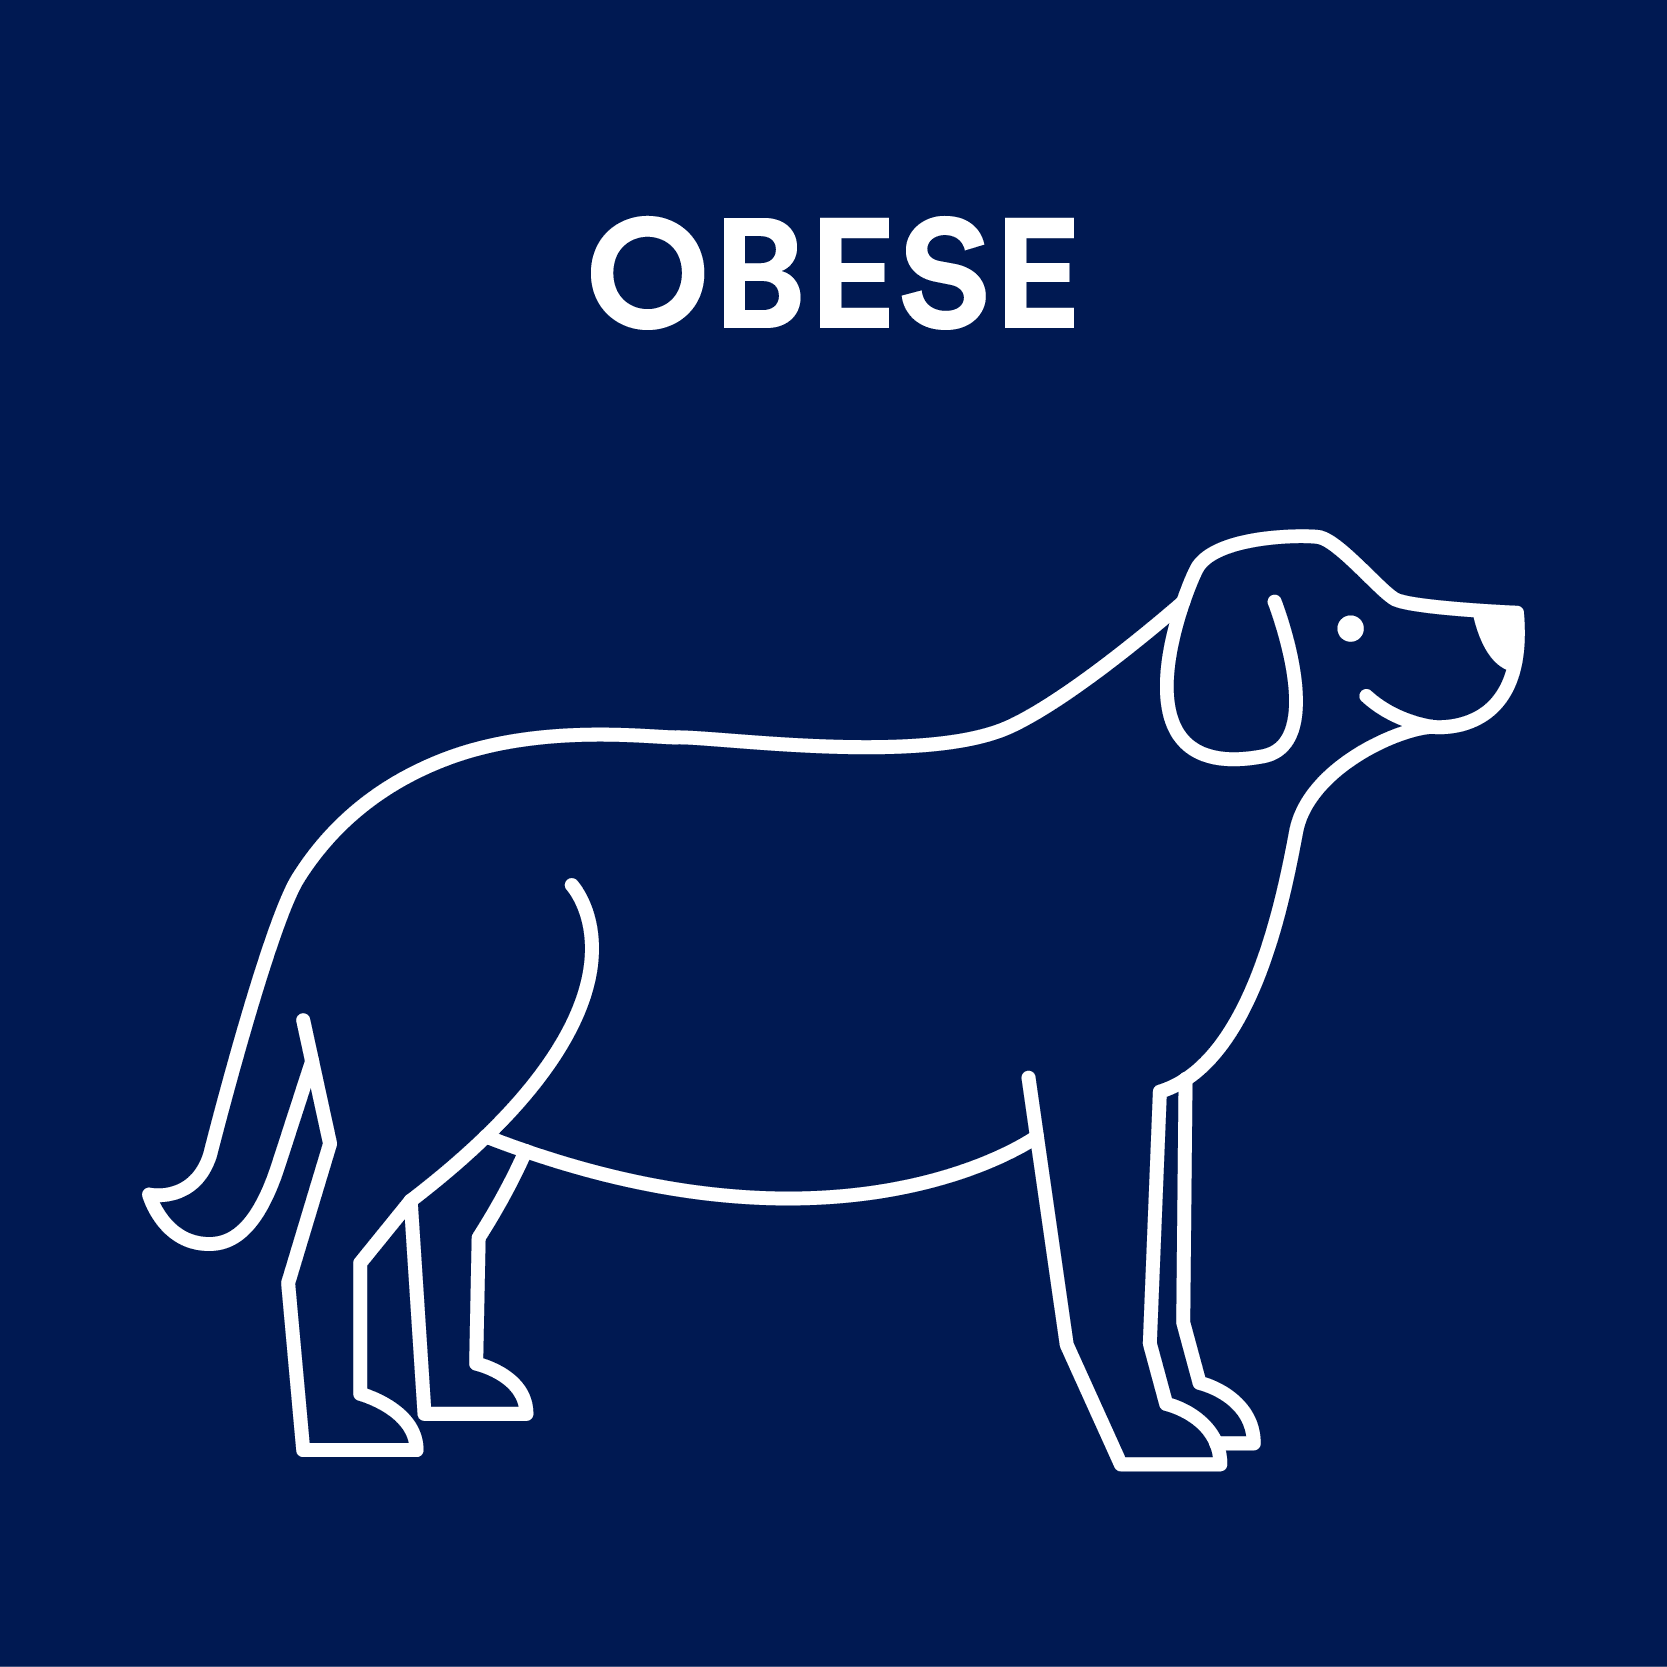 Is My Dog Overweight?